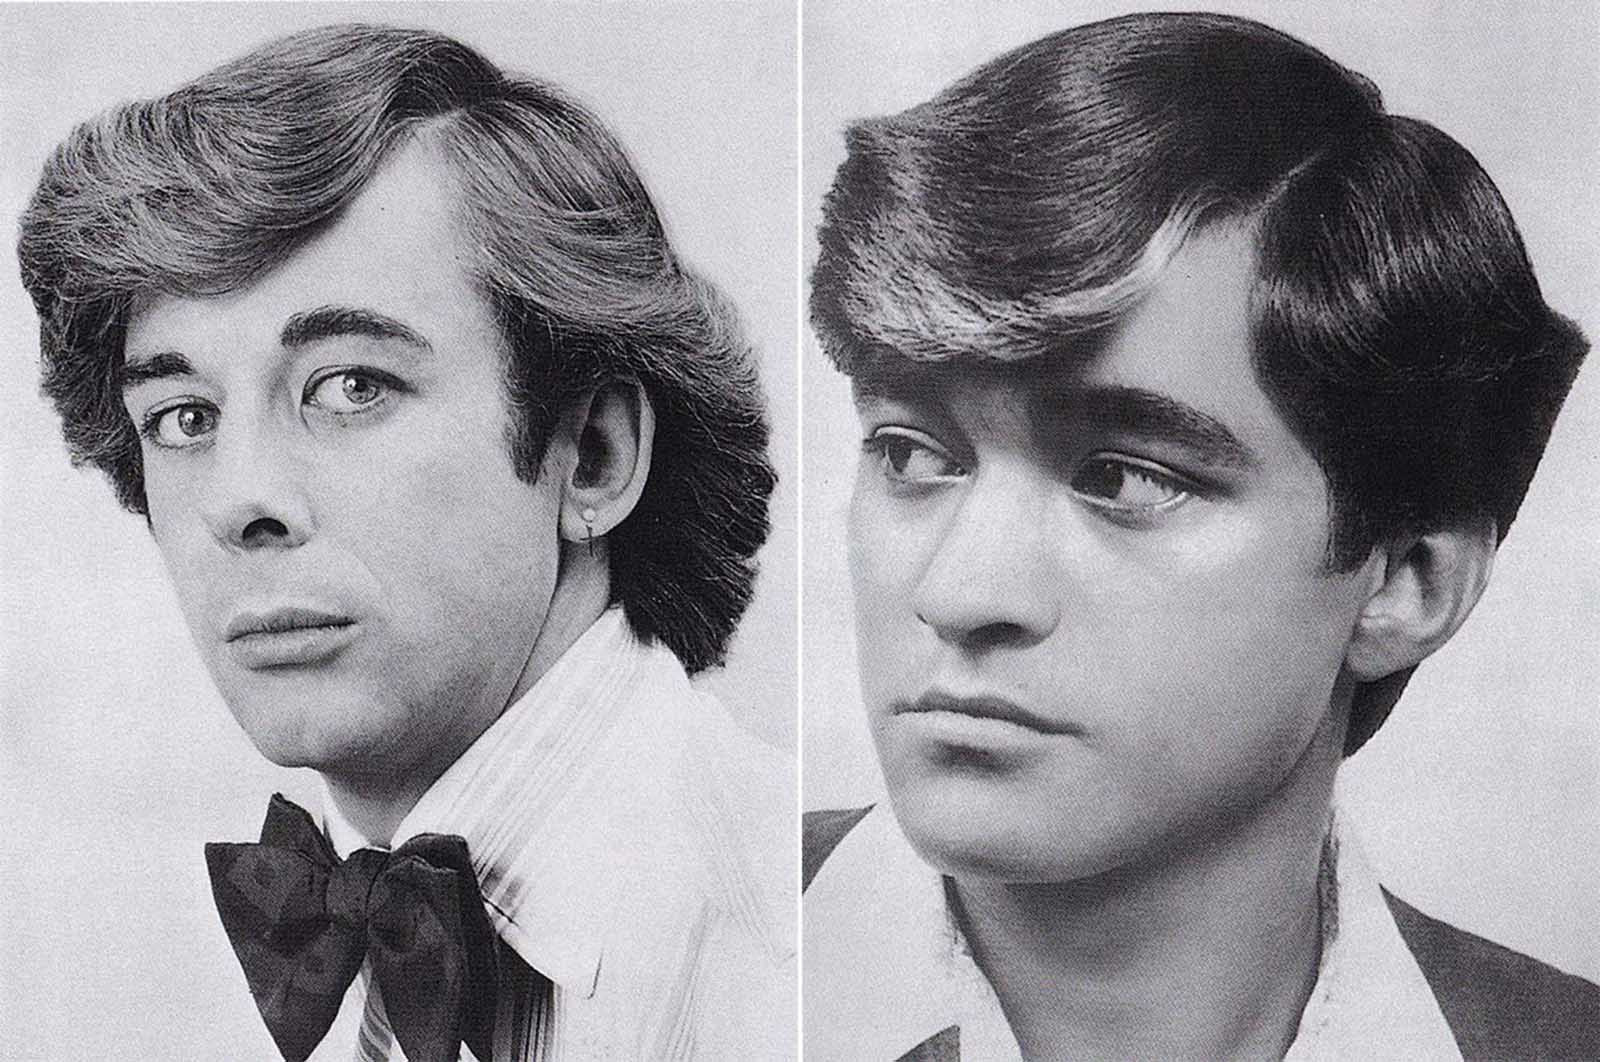 Mens 60S Hairstyle
 Romantic men’s hairstyle from the 1960s–1970s